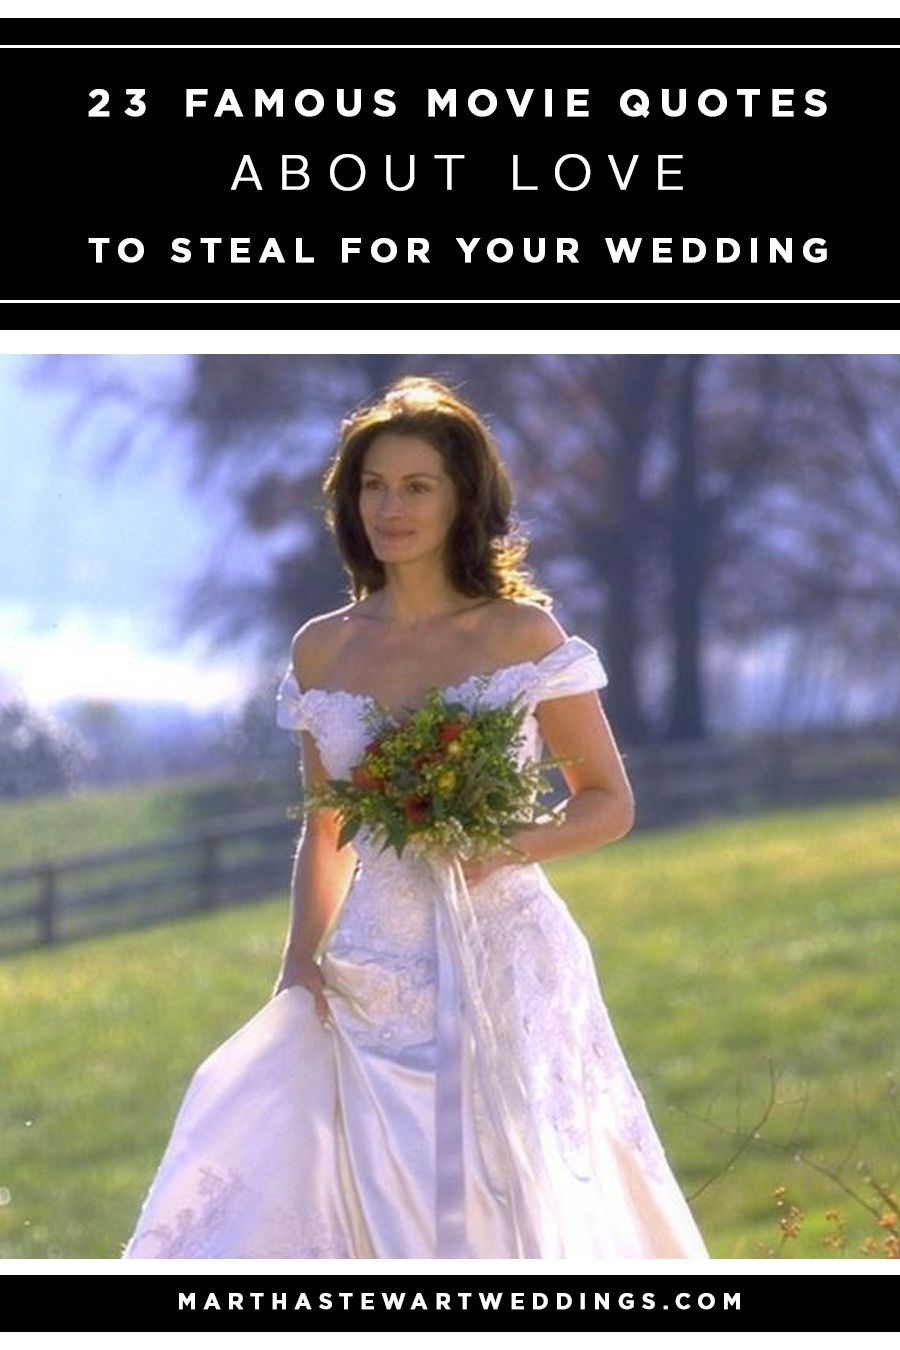 23 Famous Movie Quotes About Love to Steal for Your Wedding Vows -   16 famous wedding Vows
 ideas